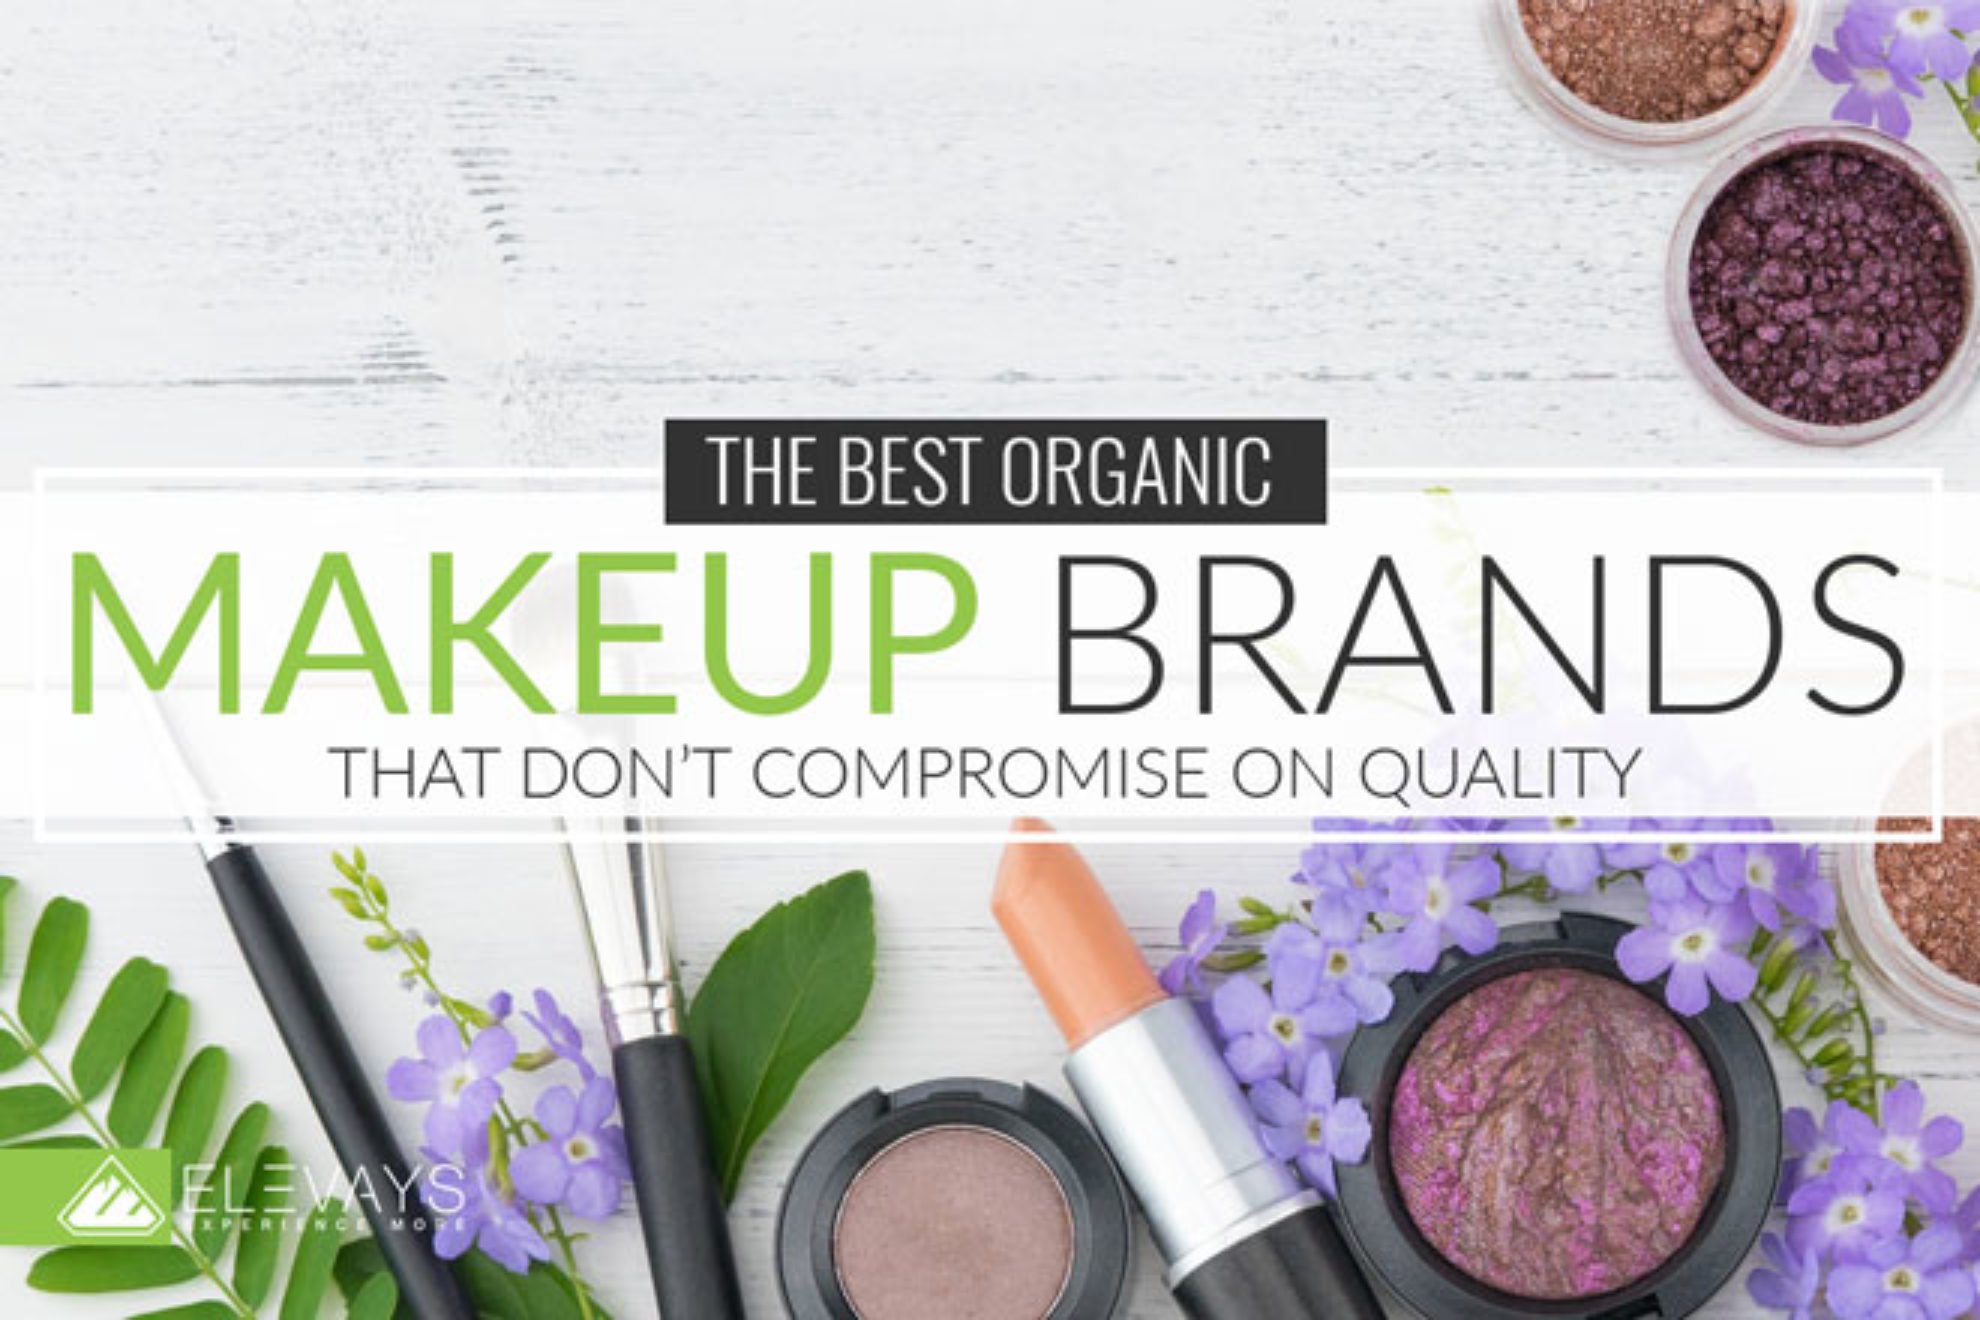 vallei Humoristisch als The Best Organic Makeup Brands that Don't Compromise On Quality - Elevays